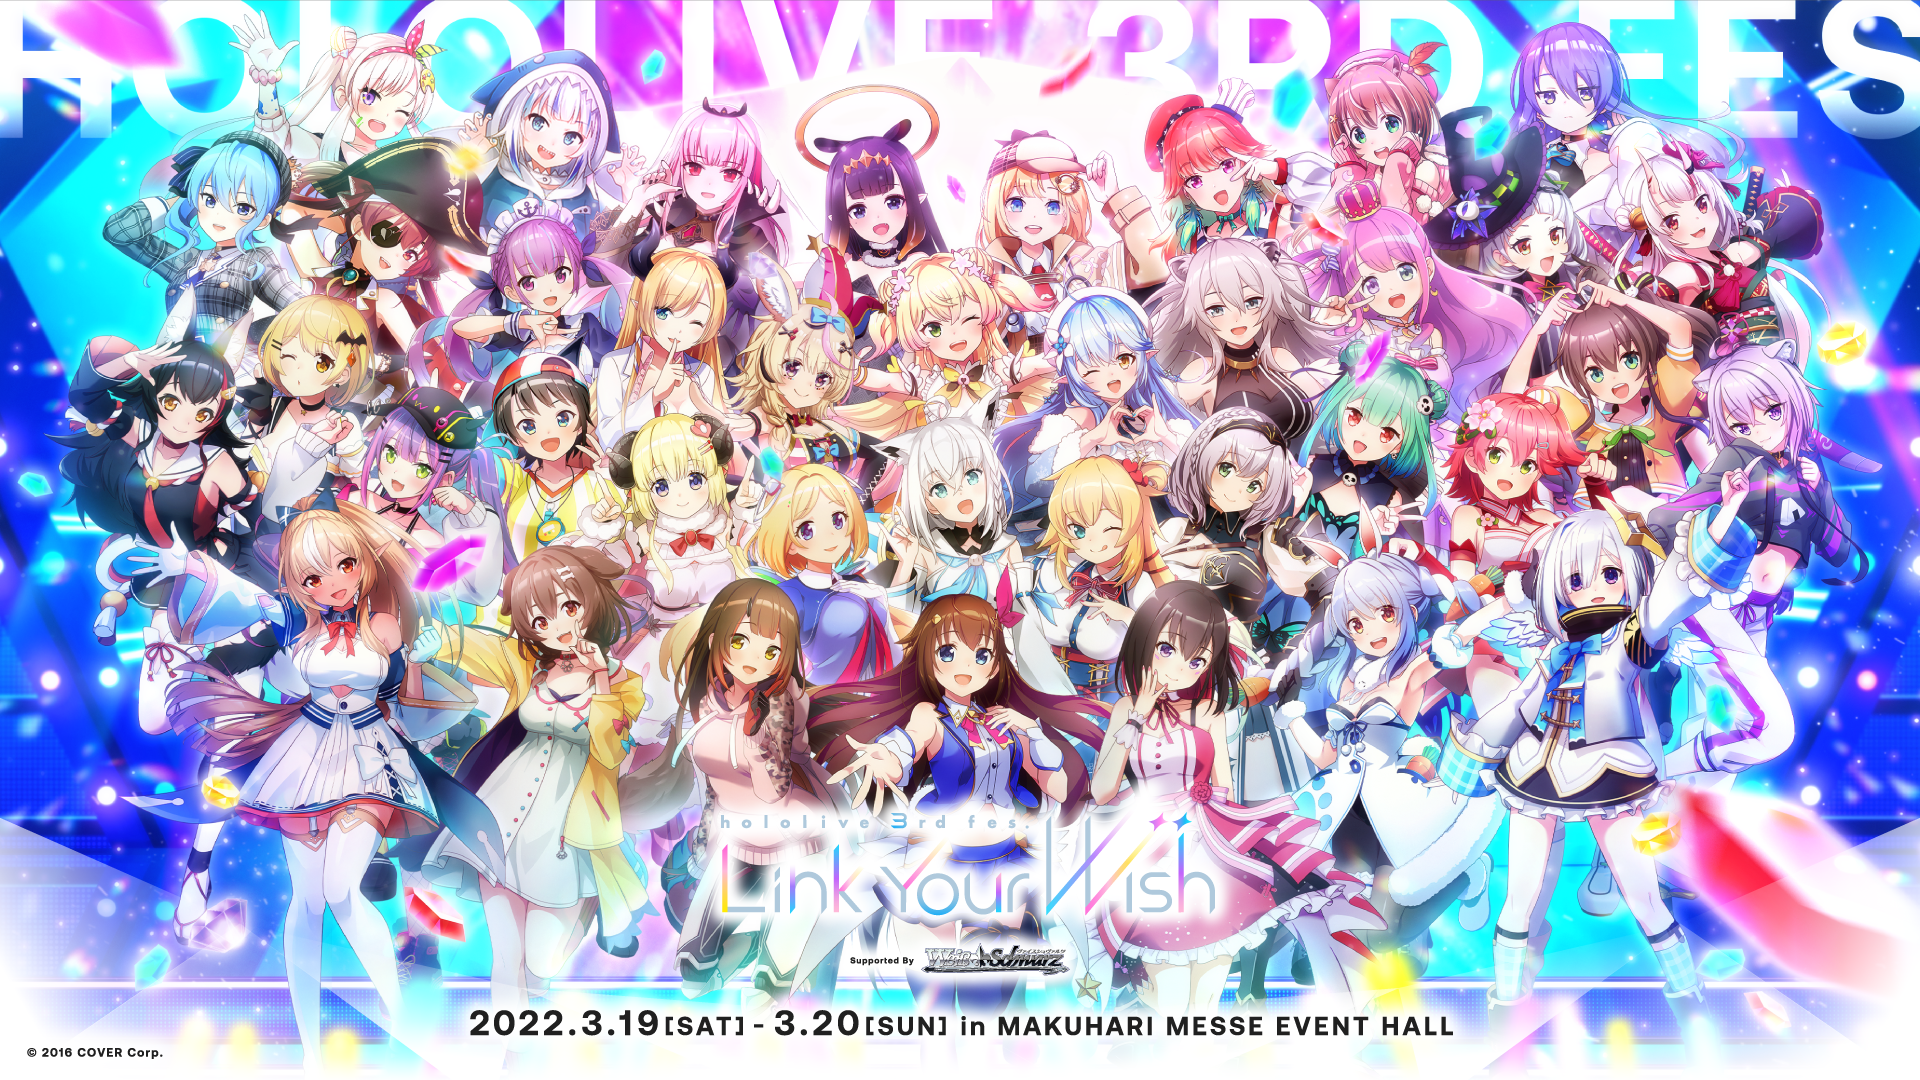 hololive SUPER EXPO 2022》・《hololive 3rd fes. Link Your Wish 